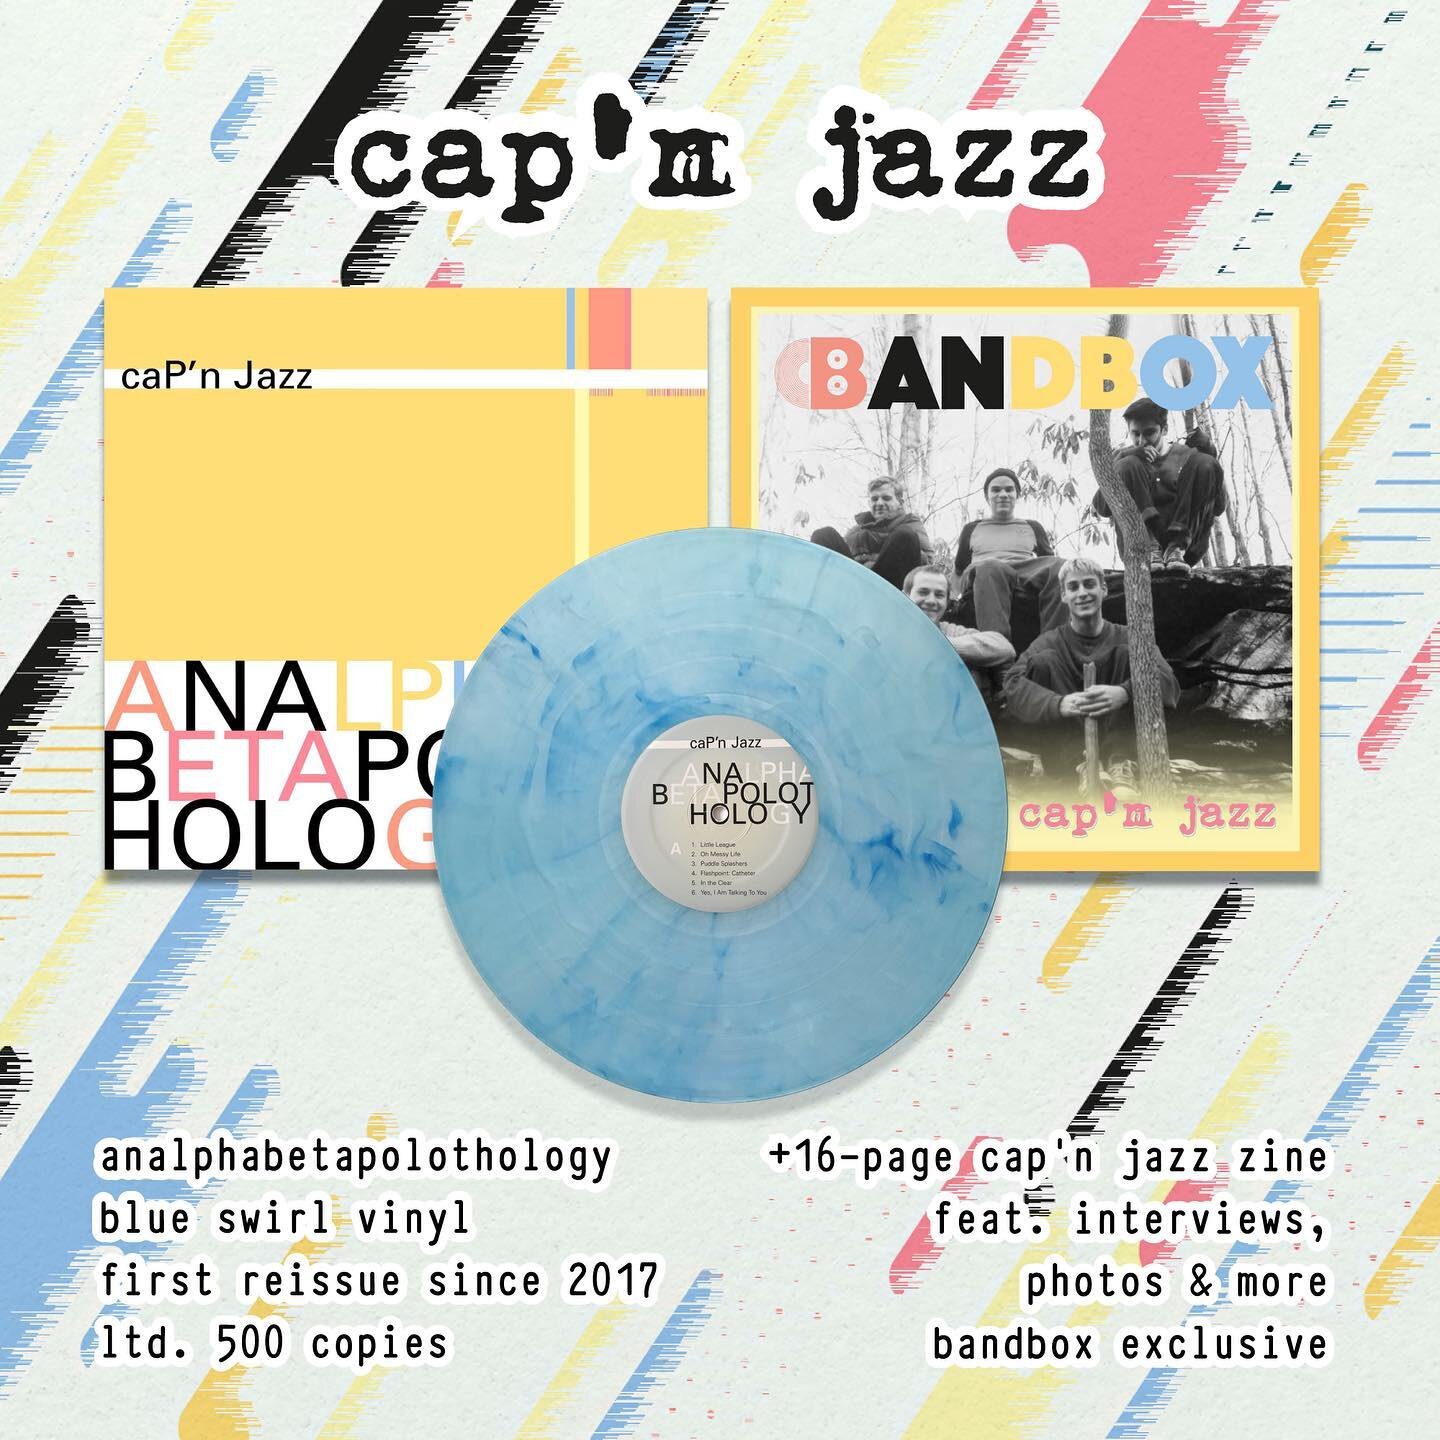 👀 @bandboxvinyl is reissuing a special edition of @CapnJazzofficial's 'Analphabetapolothology' on blue swirl vinyl. Each copy of this exclusive pressing includes a 16-page Cap&rsquo;n Jazz zine, featuring the band's track-by-track guide to the album